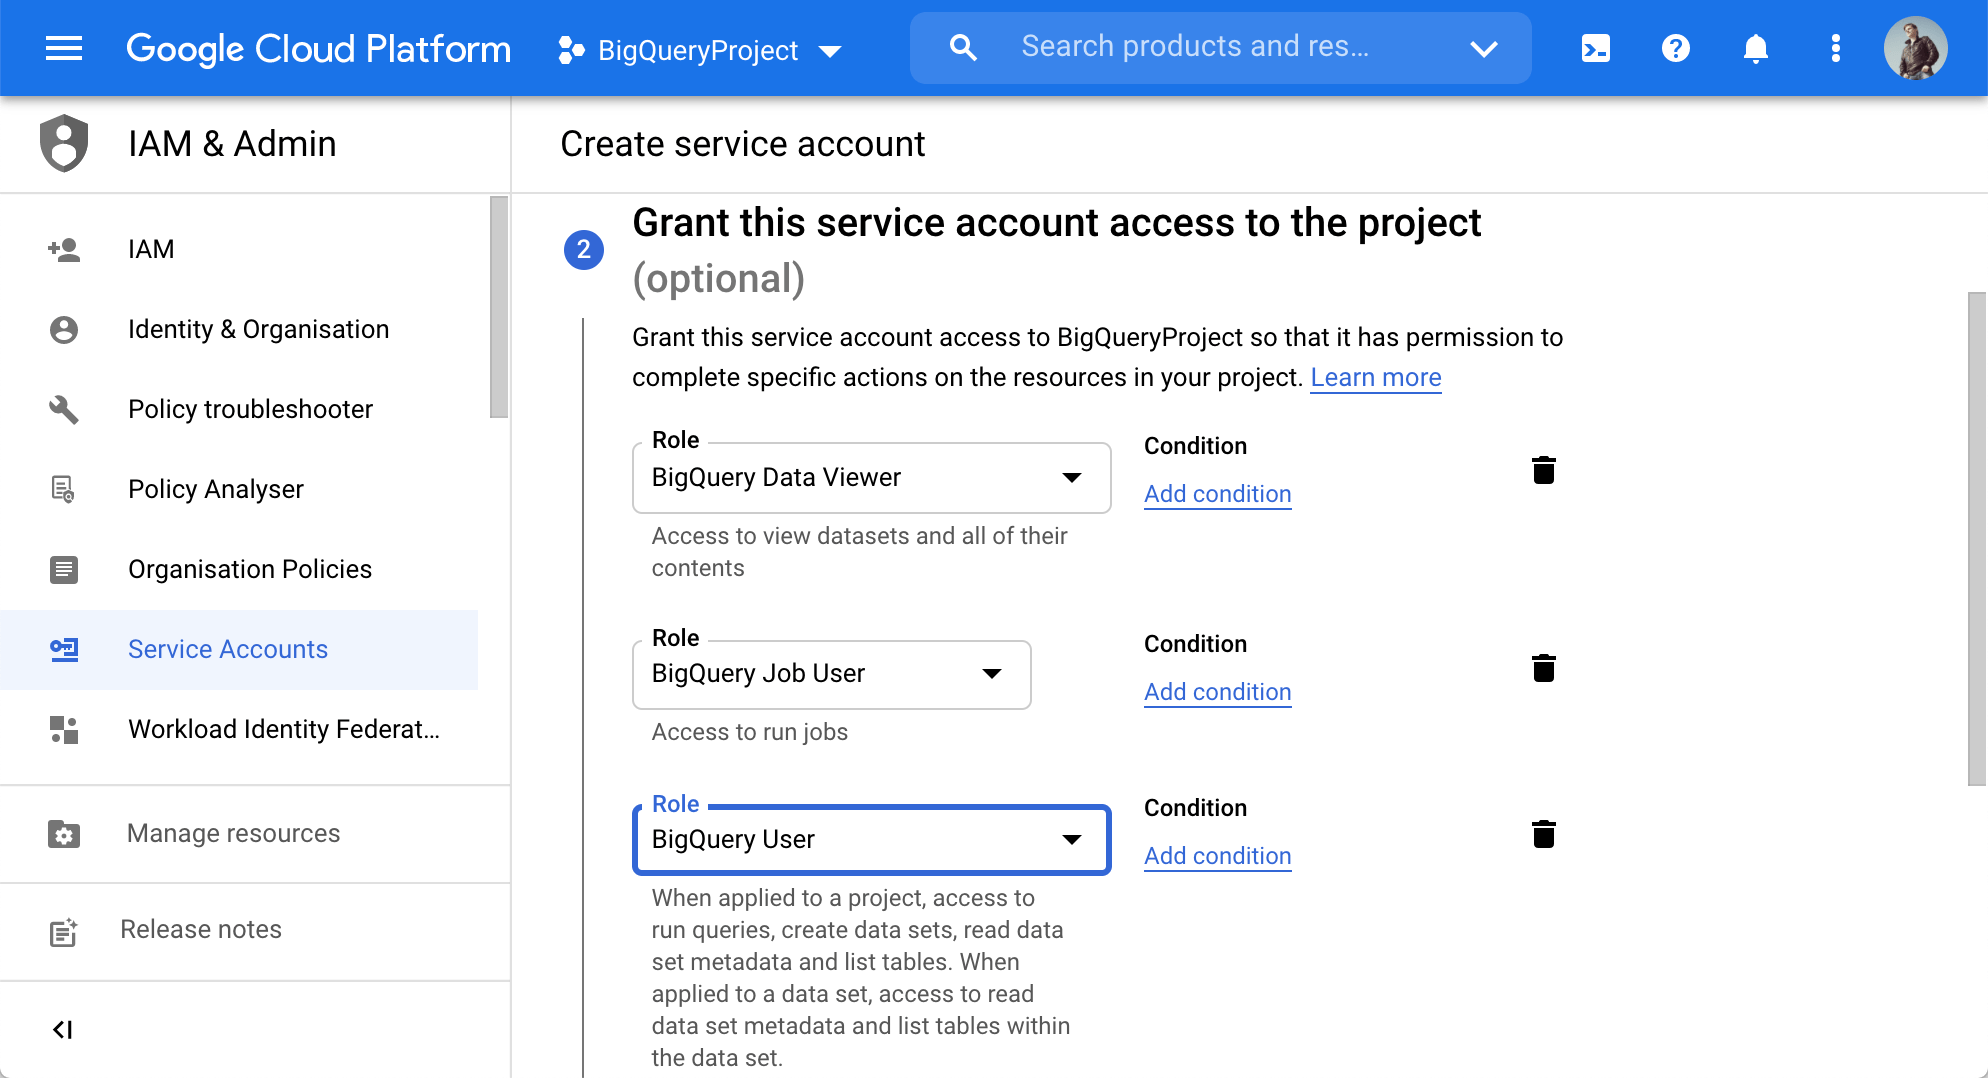 Grant this service account access to the project